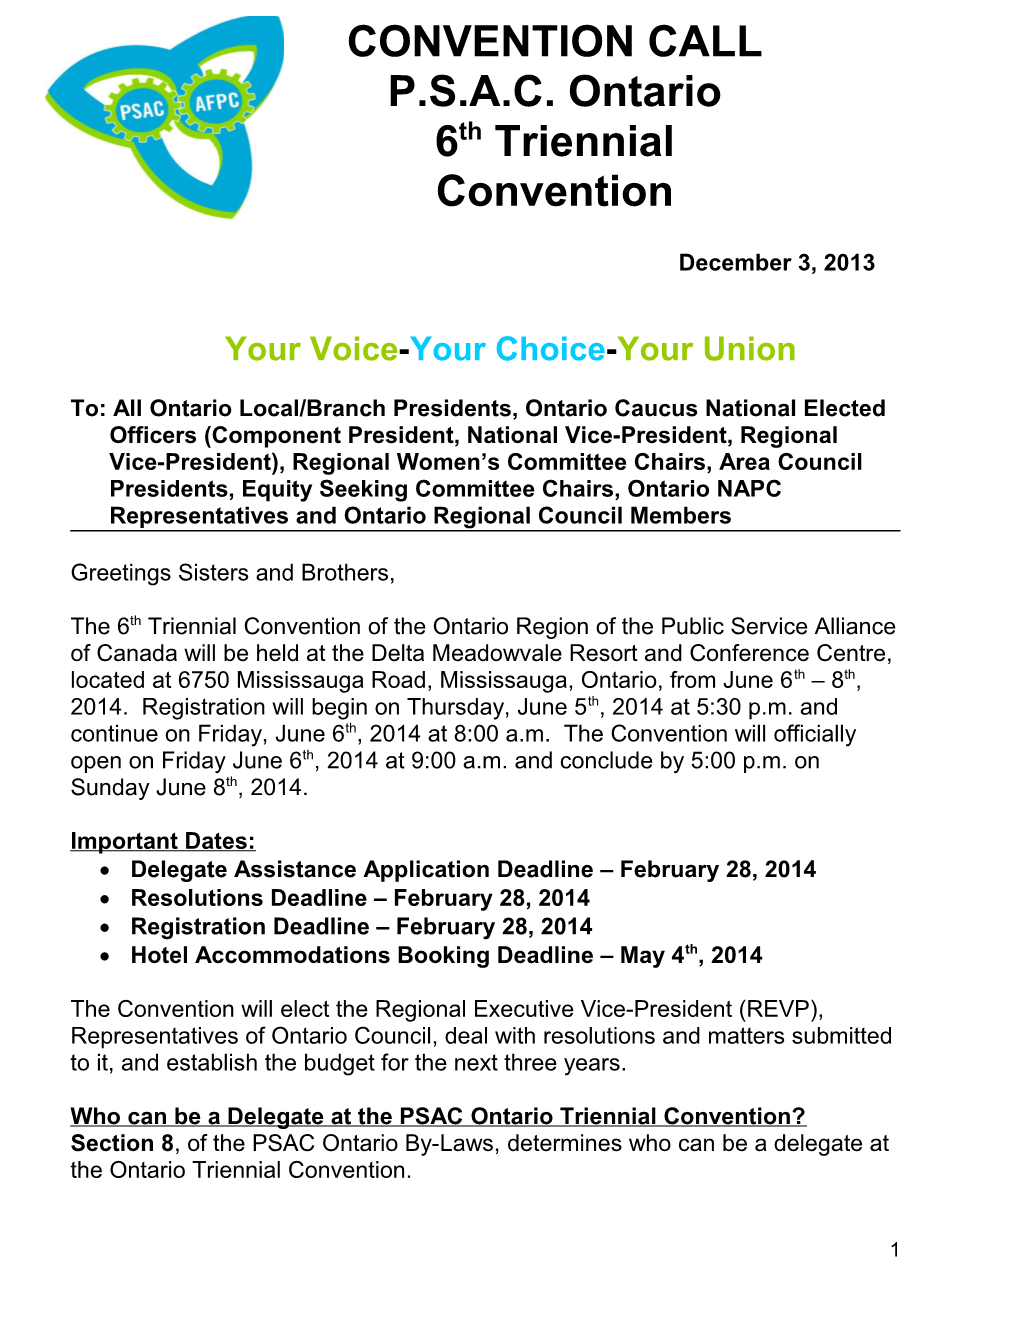 Your Voice-Your Choice-Your Union